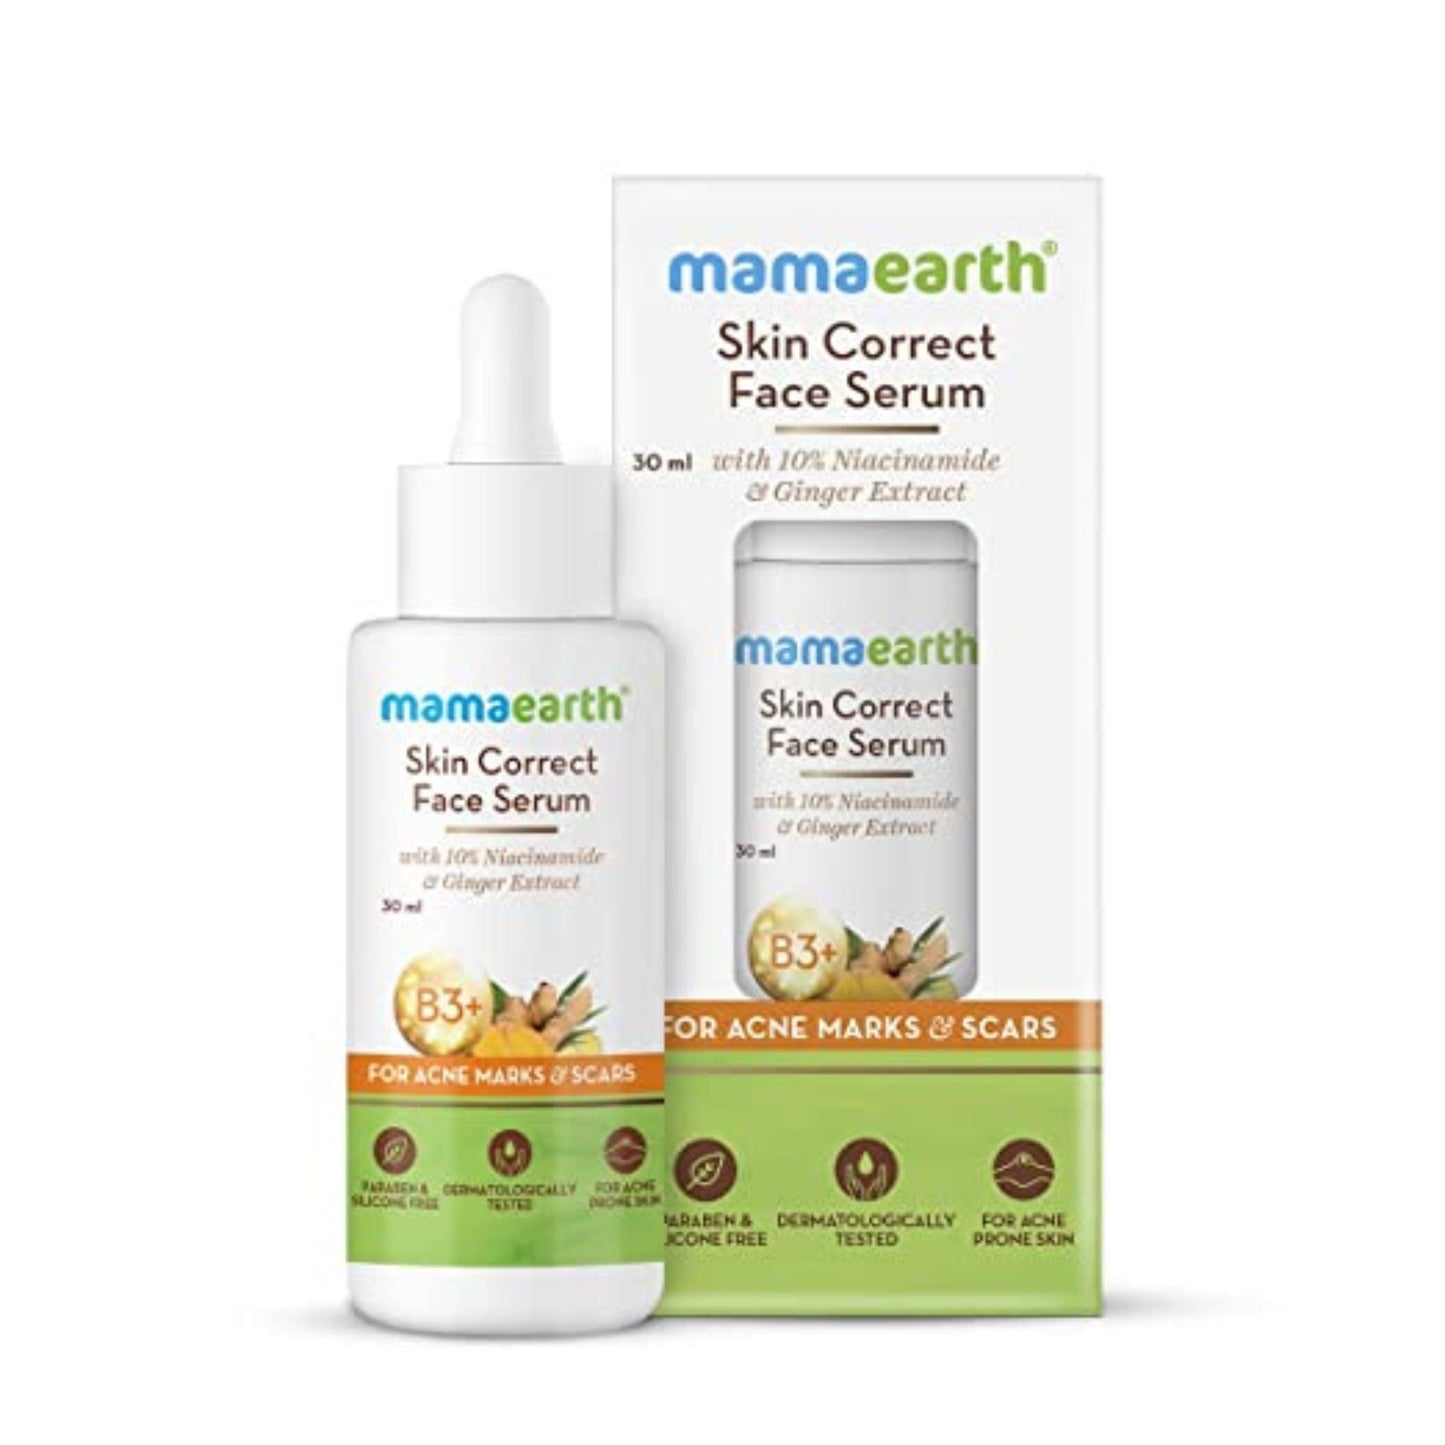 Mamaearth Skin Correct Face Serum Acne Scars removal cream with Niacinamide and Ginger Extract